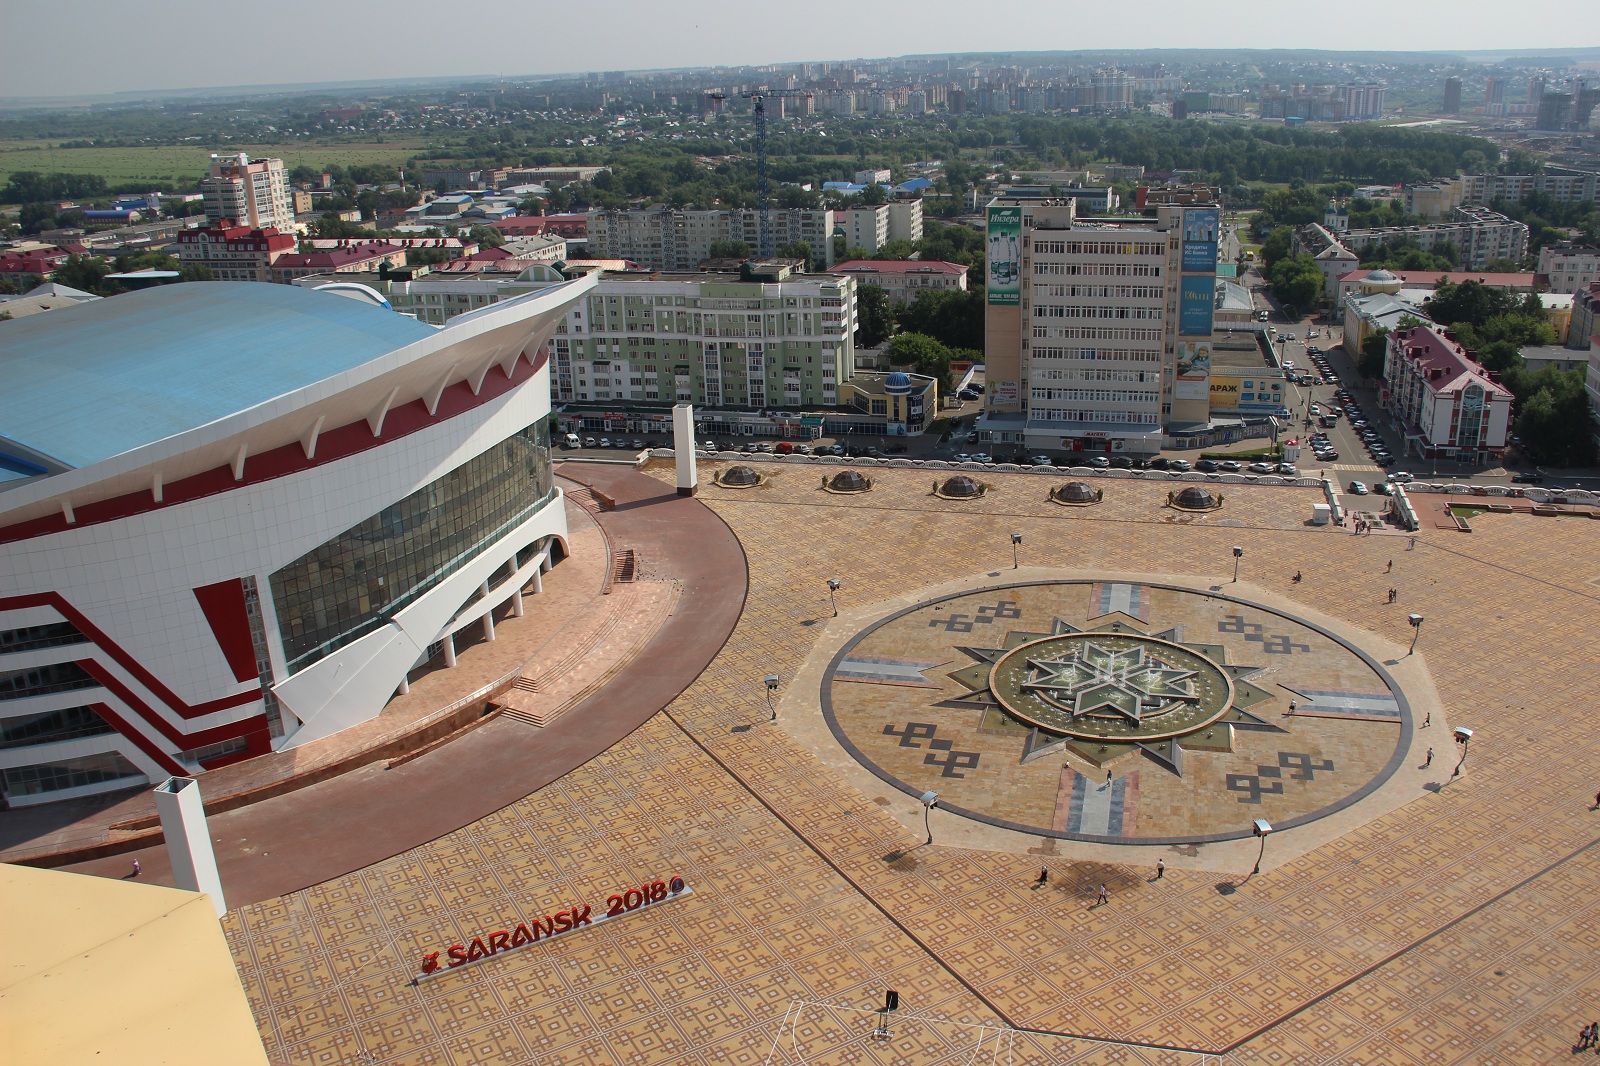 Millennium_Square_established_in_2012_when_the_city_marked_the_1000th_anniversary_of_the_unification_of_the_Mordvins_and_Russians.JPG